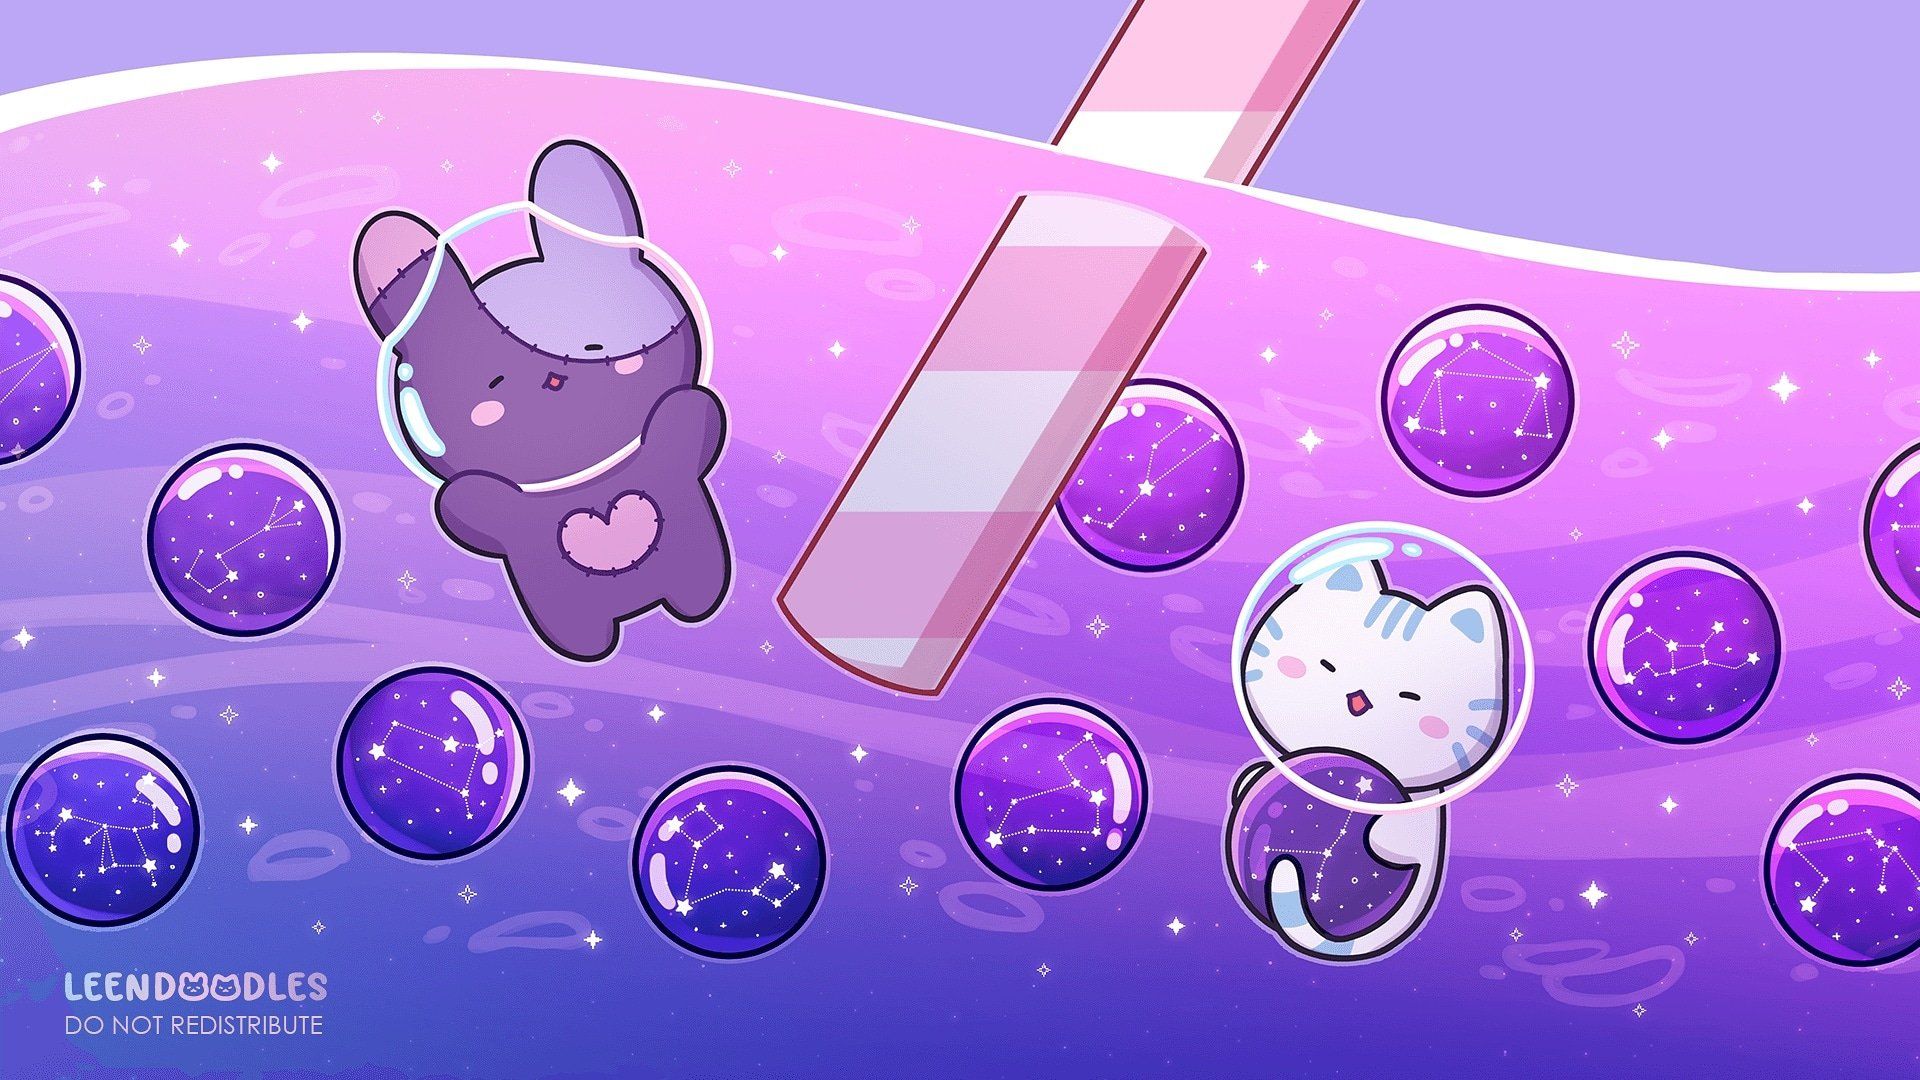 A cute illustration of a cat and a dog playing with bubbles - Boba